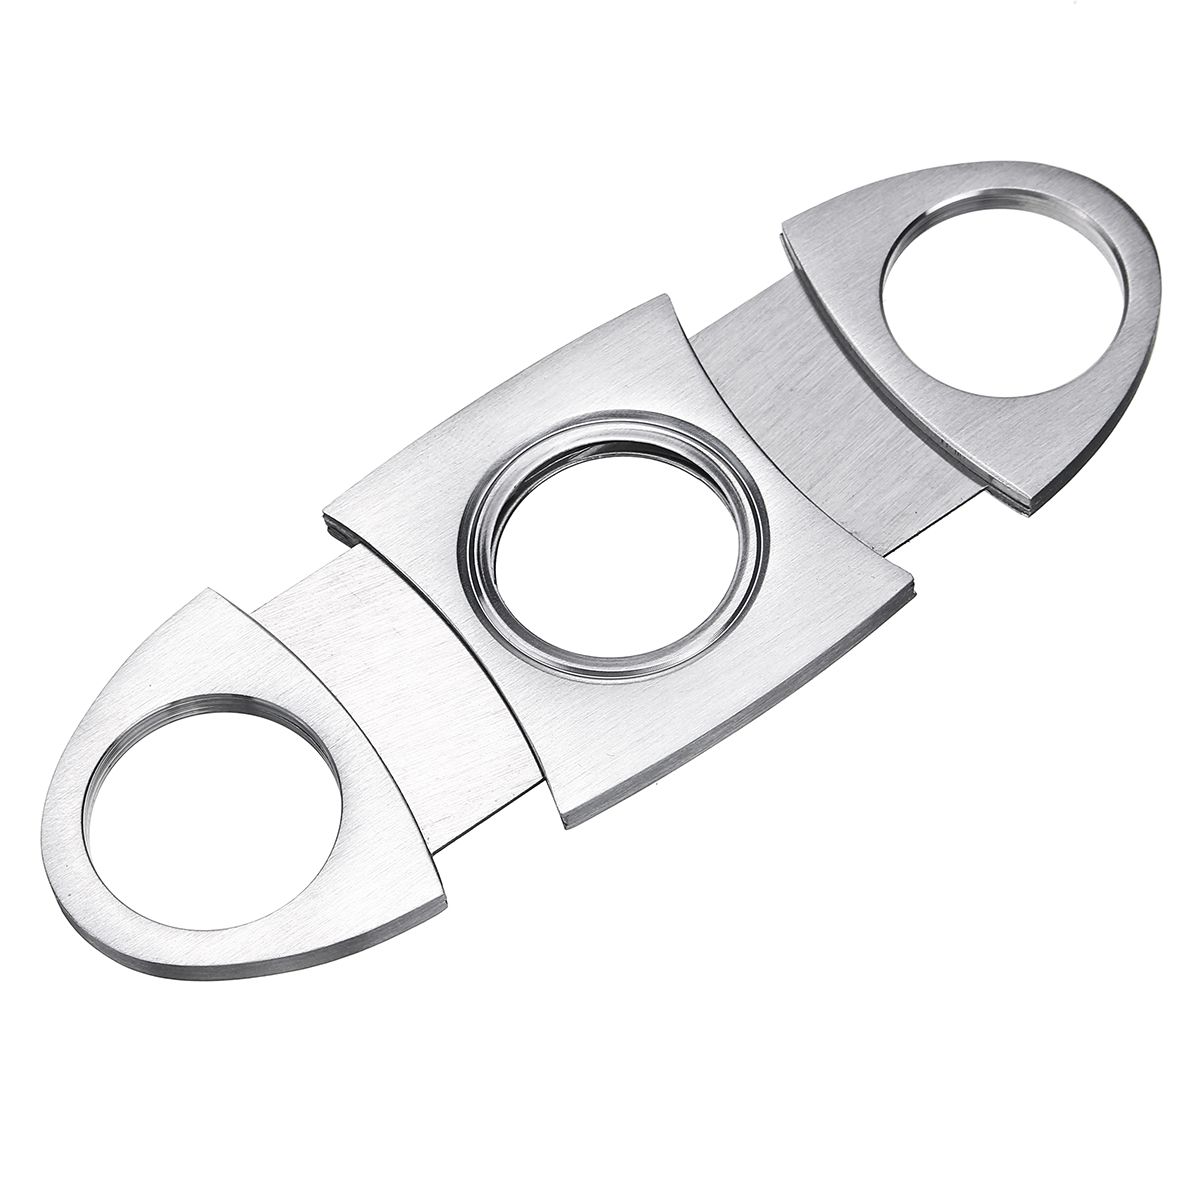 Stainless-Steel-EDC-Cutter-Pocket-Double-Blades-Scissors-1607831